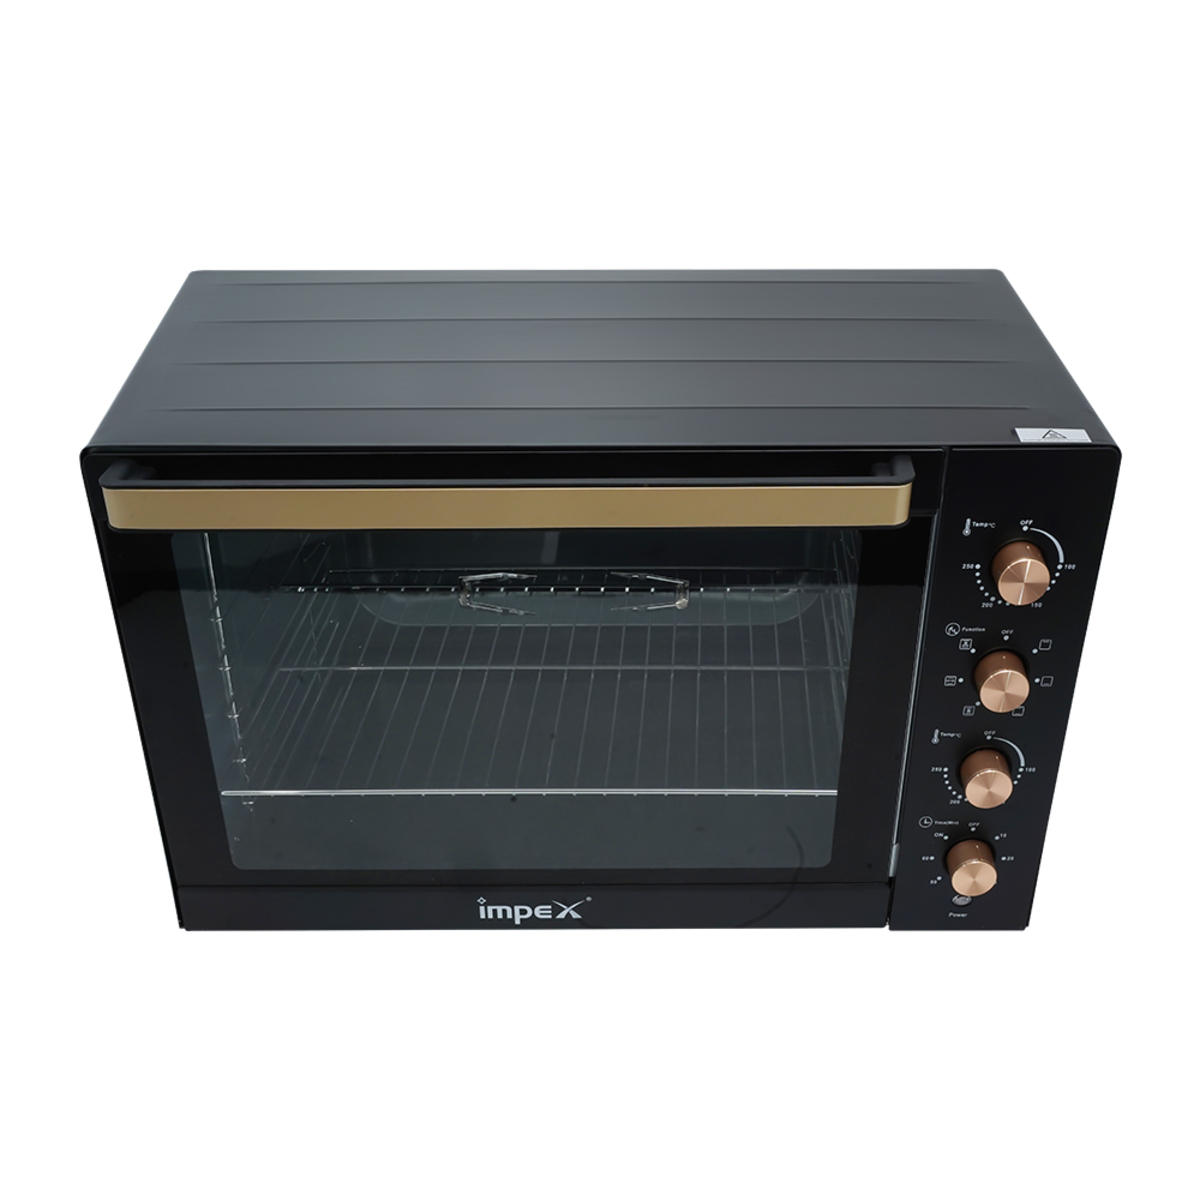 Impex OV 2905 120 Litre Electric Oven with 4 Golden Control Knobs